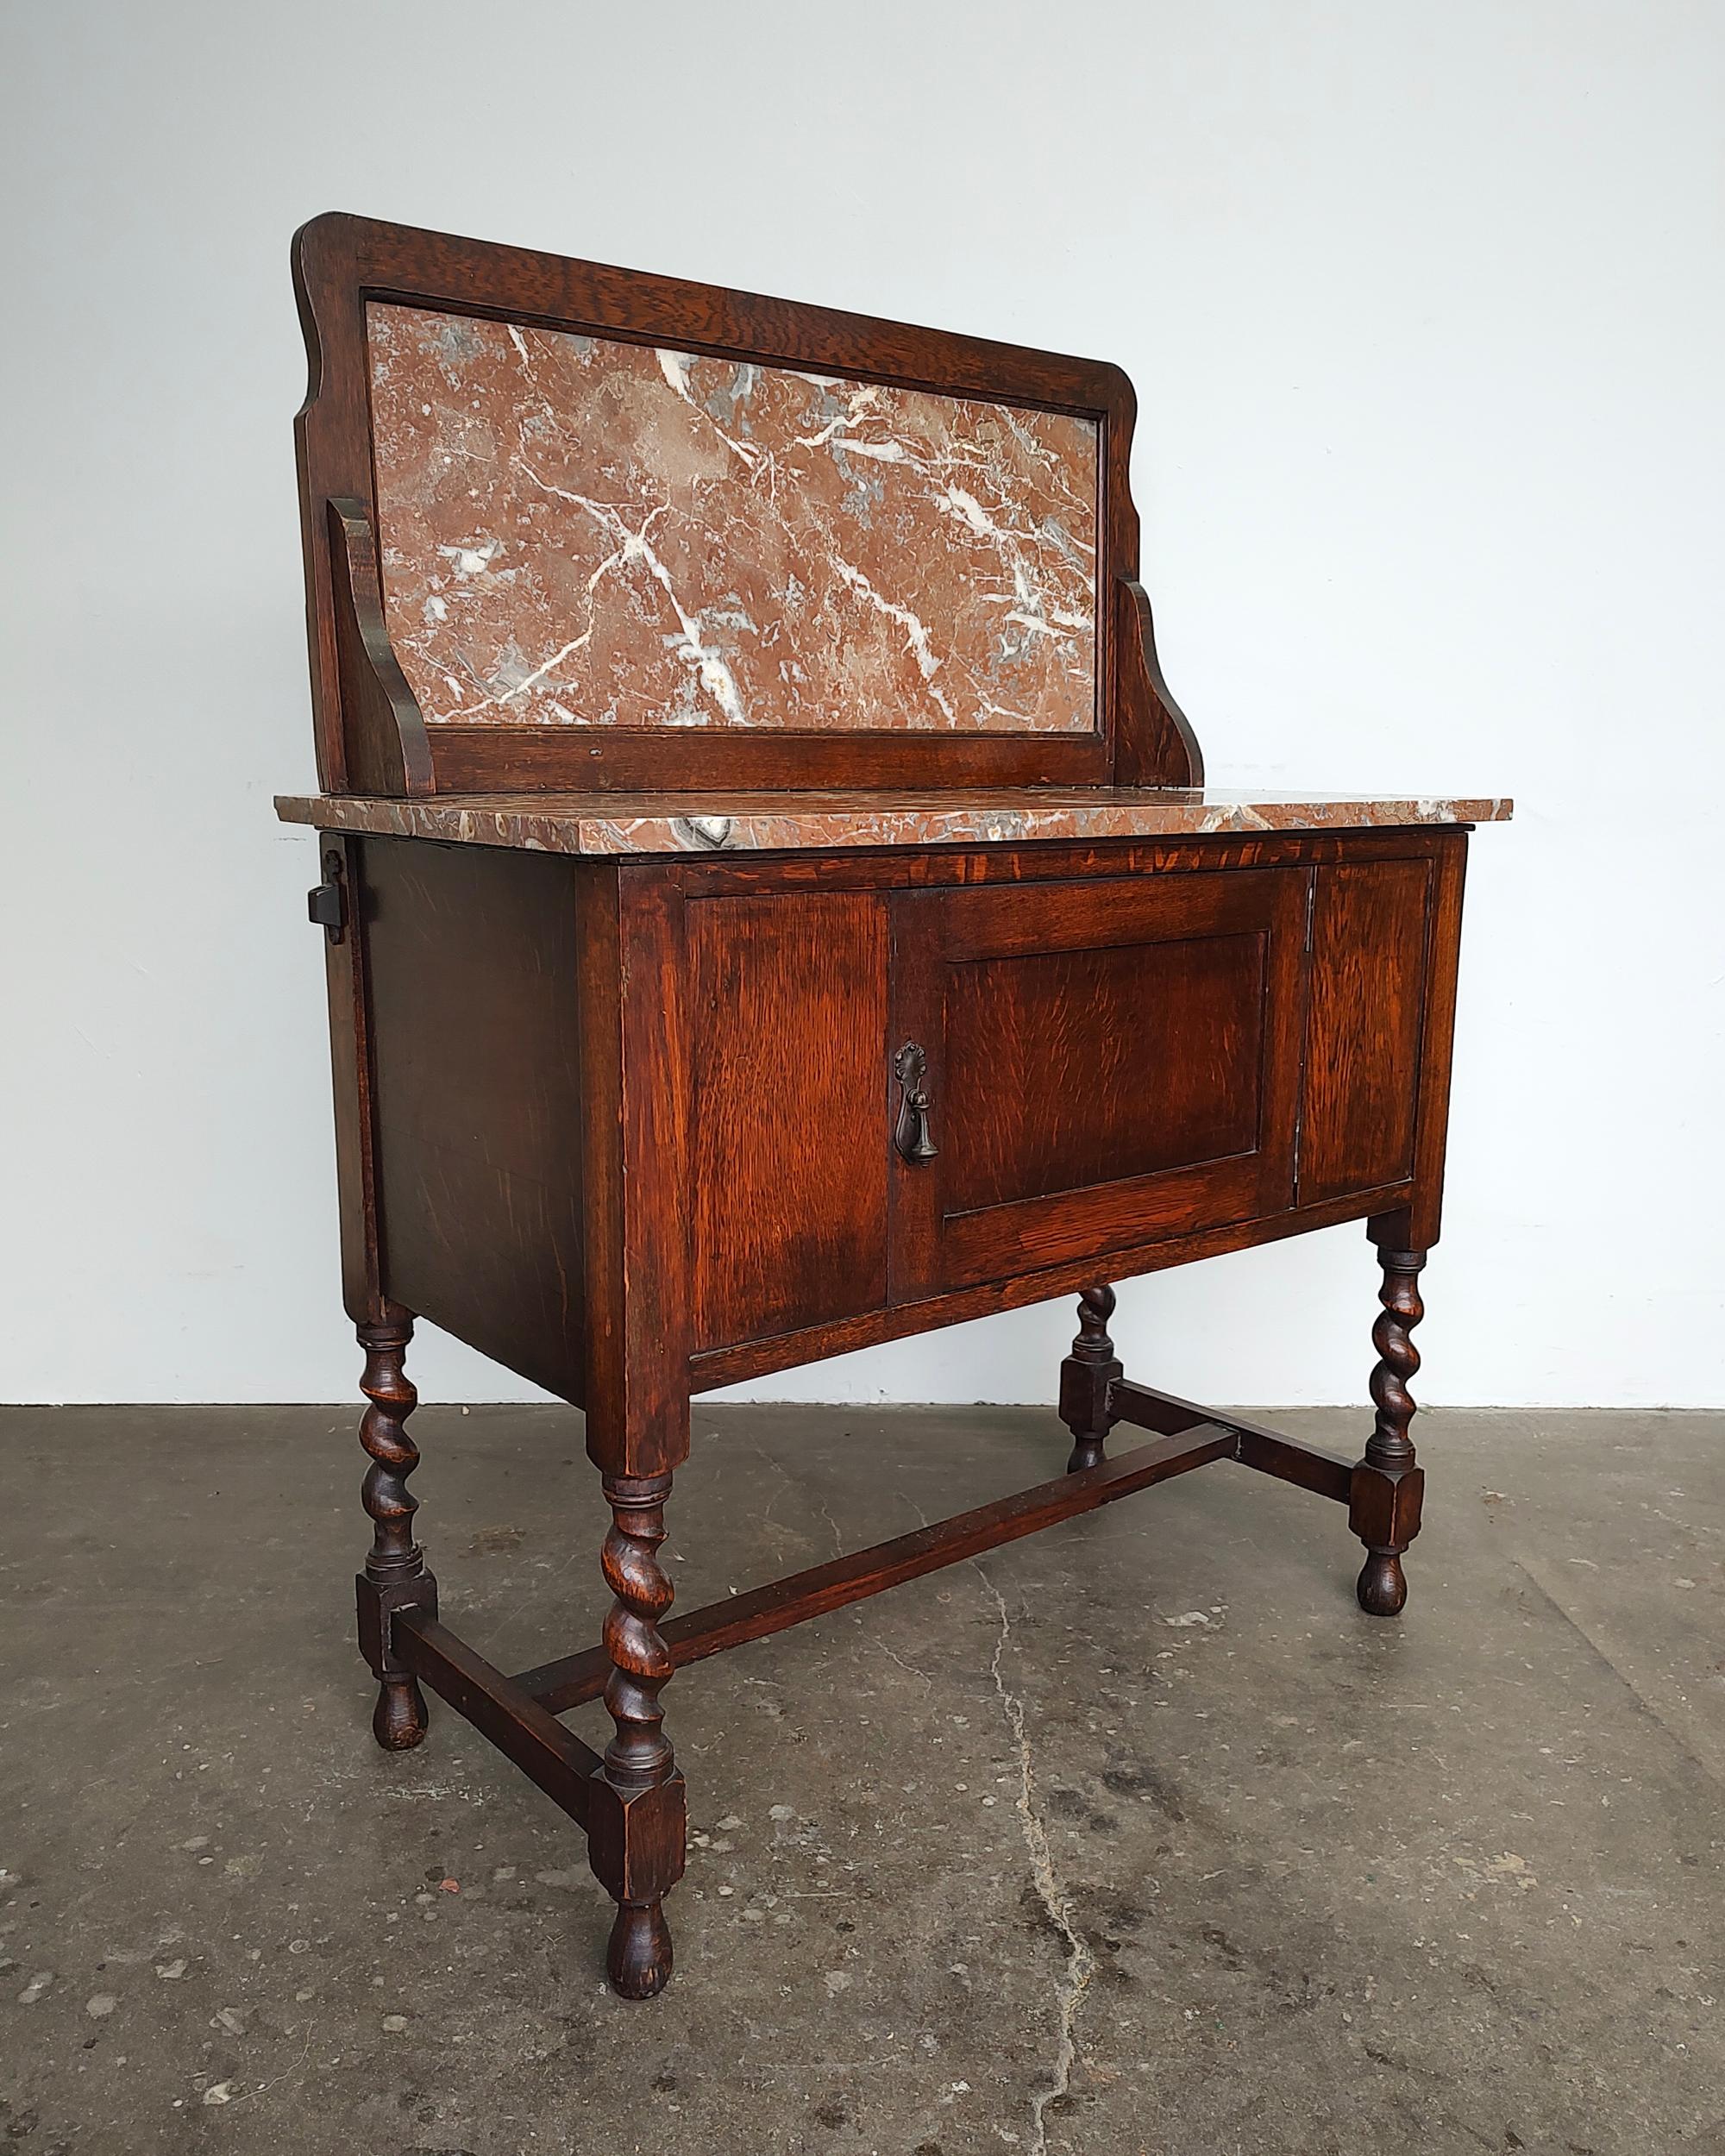 Early 20th-century oak wood wash stand cabinet with original pink/grey stone top and backsplash, and beautiful carved barley twist legs. One cabinet door with patinaed brass drop pull hardware. Inside opens to large storage compartment. Overall